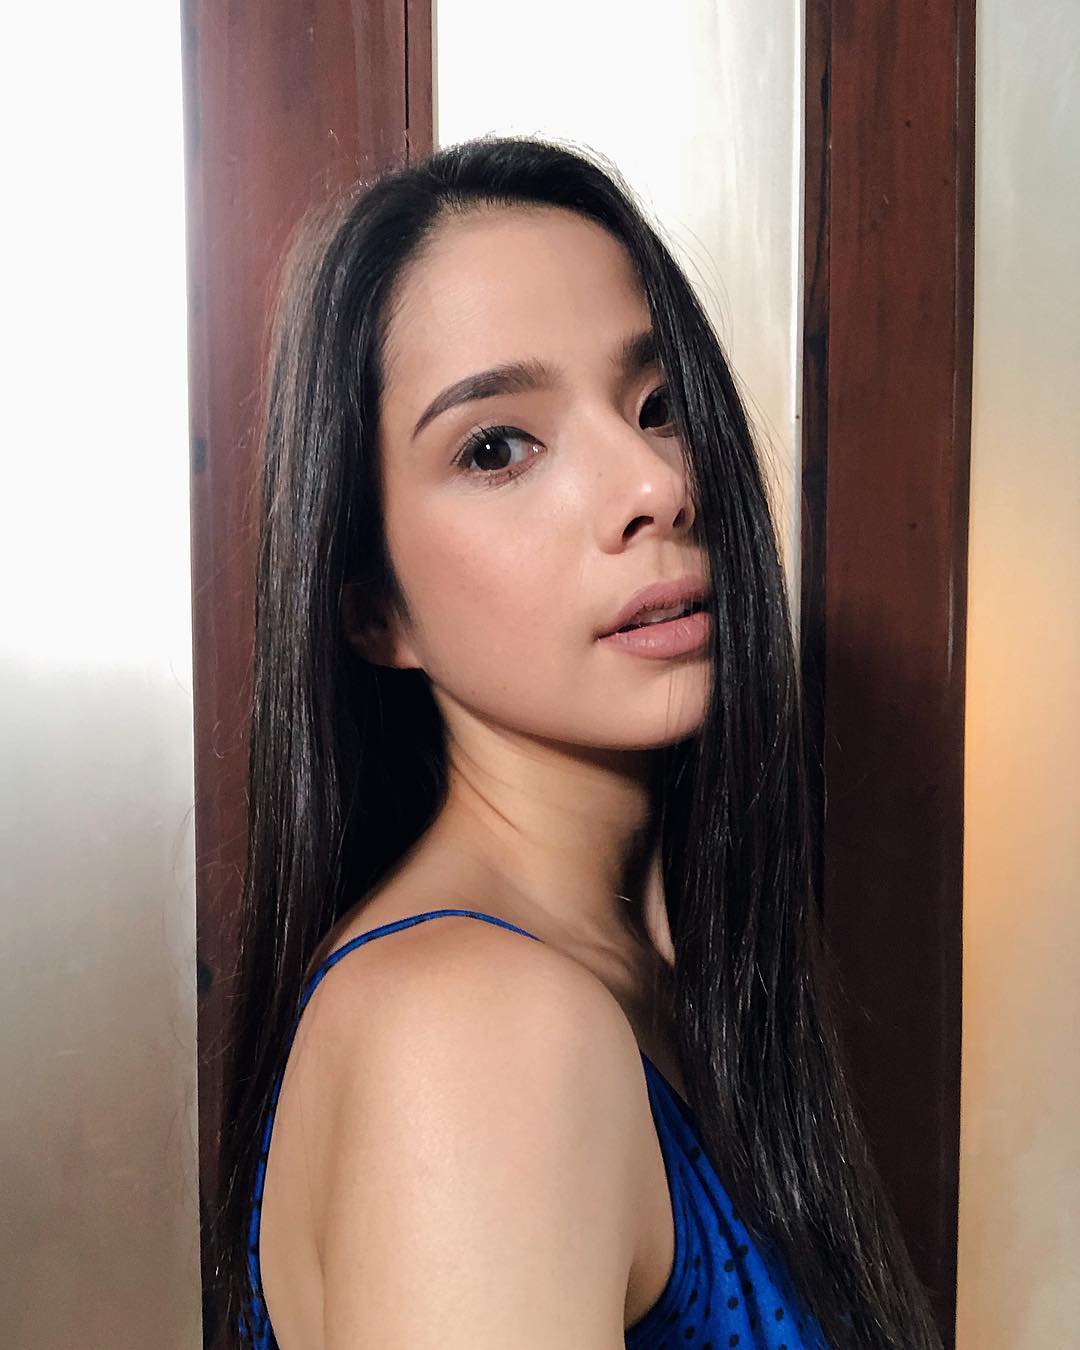 49 Hot Pictures Of Maxene Magalona Which Will Make You Crave For Her | Best Of Comic Books